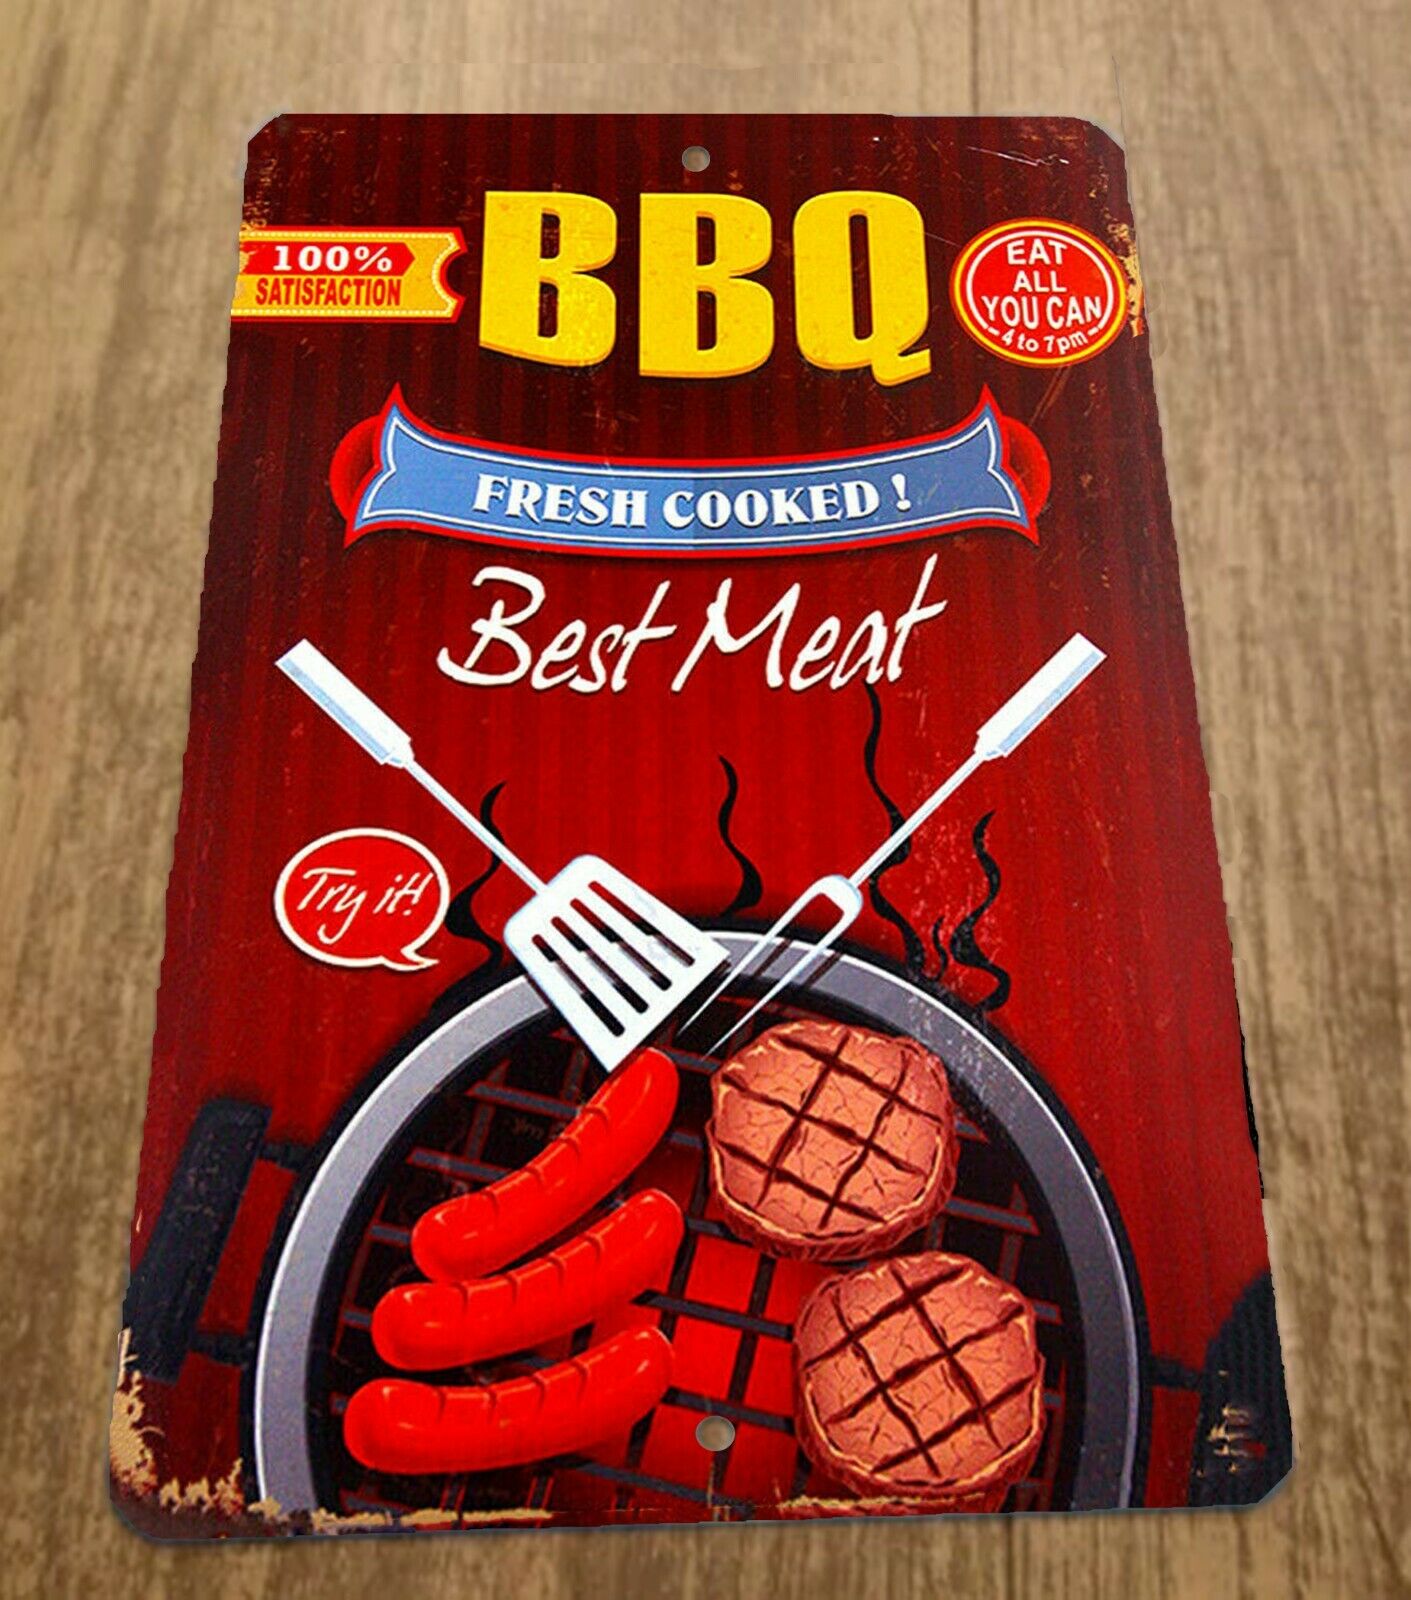 BBQ Fresh Cooked Best Meat Grilling 8x12 Metal Wall Vintage Misc Poster Sign